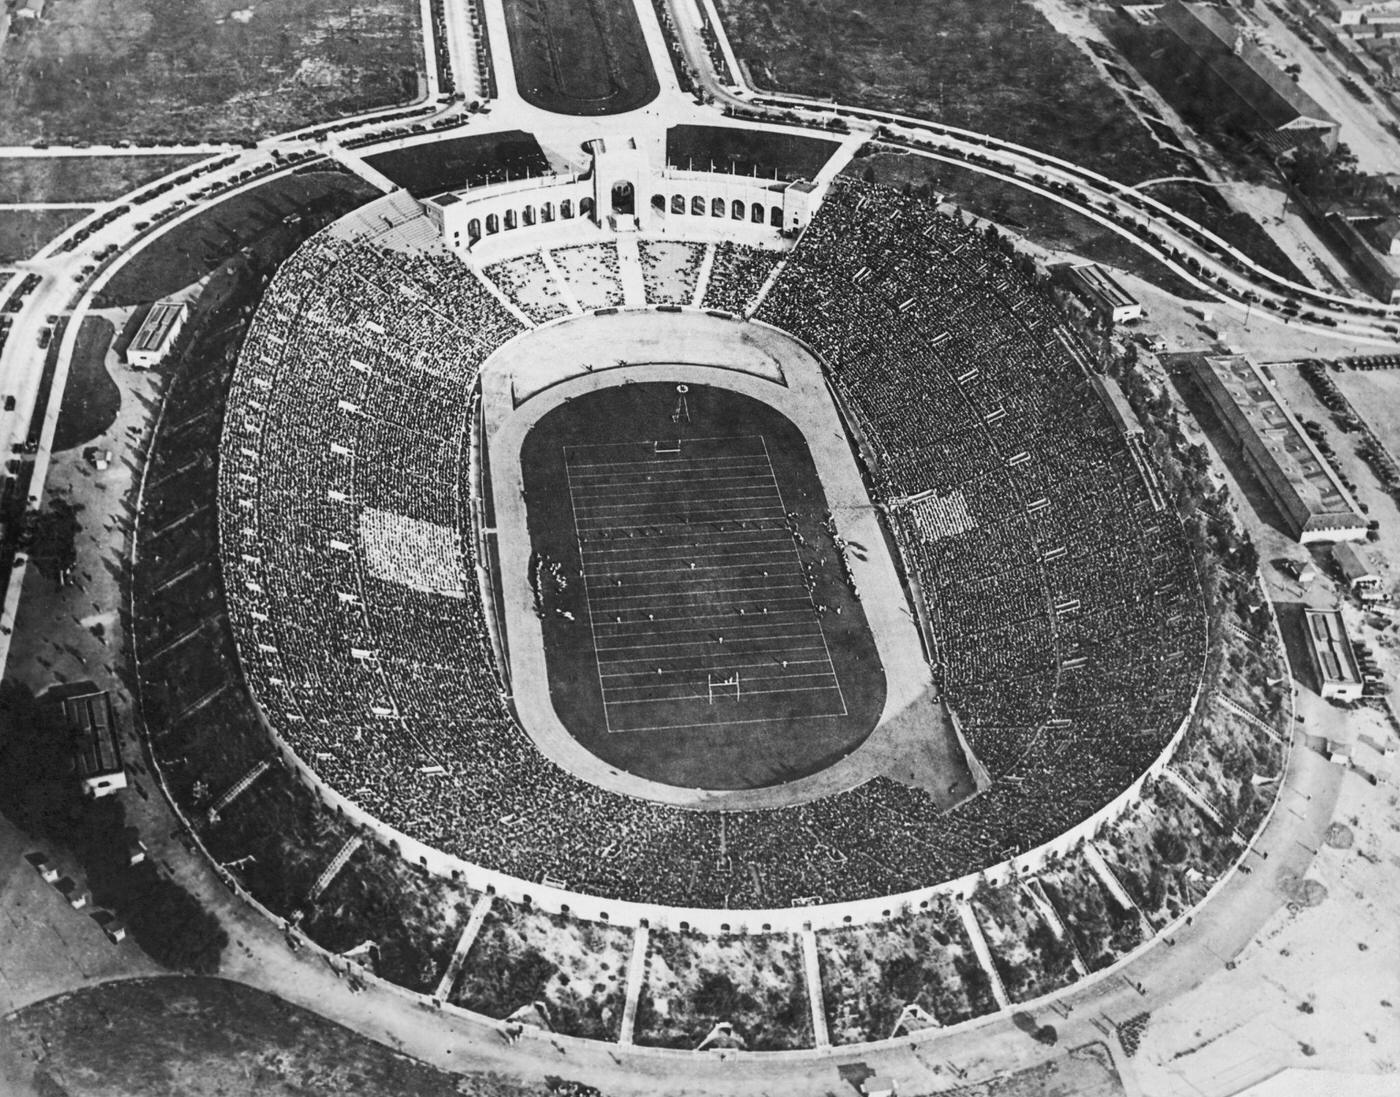 Crowds watching an American football match at the Los Angeles Memorial Coliseum, 1930.